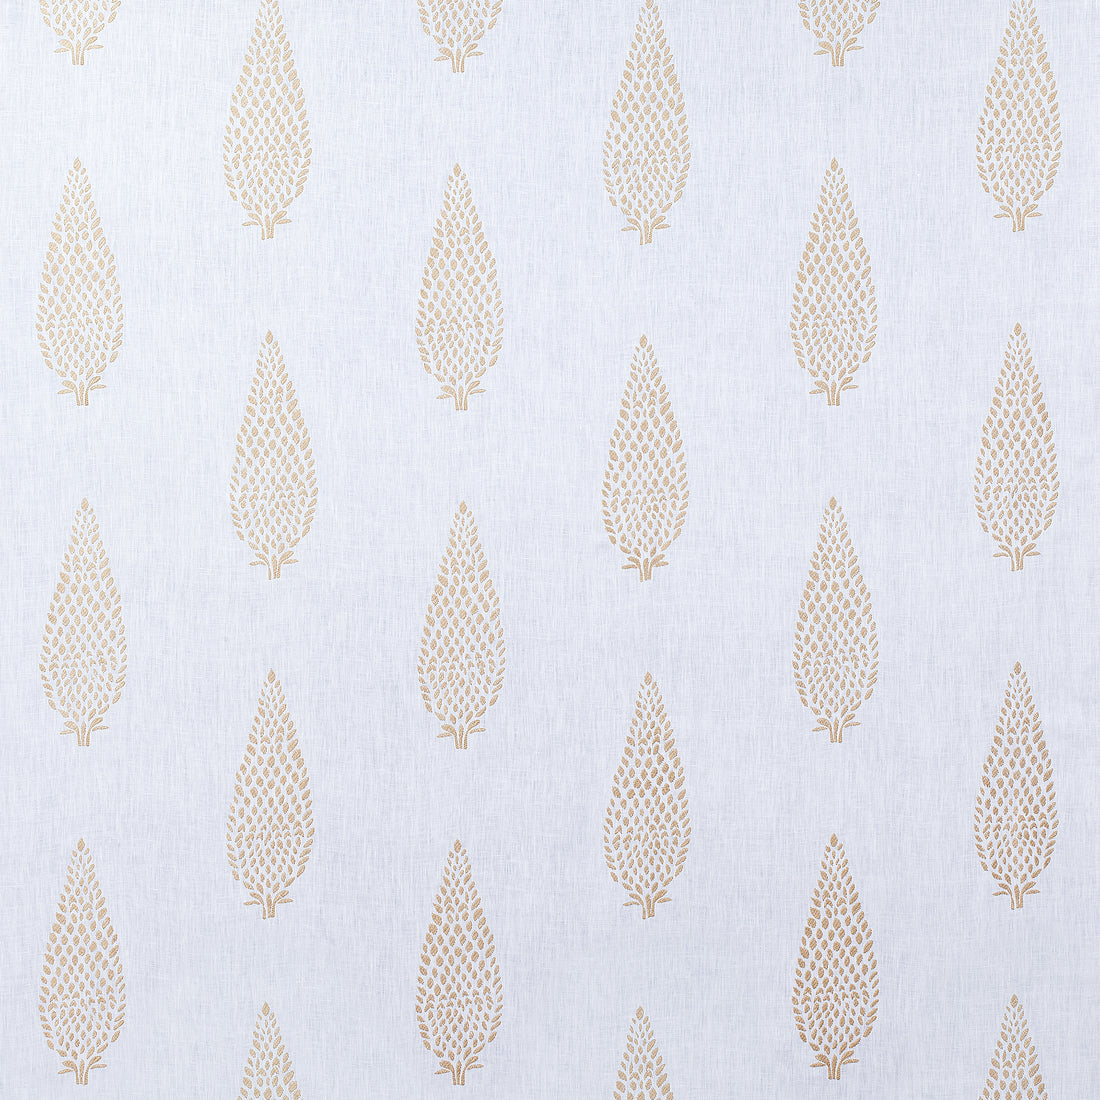 Manor Embroidery fabric in gold on white color - pattern number AW73009 - by Anna French in the Meridian collection